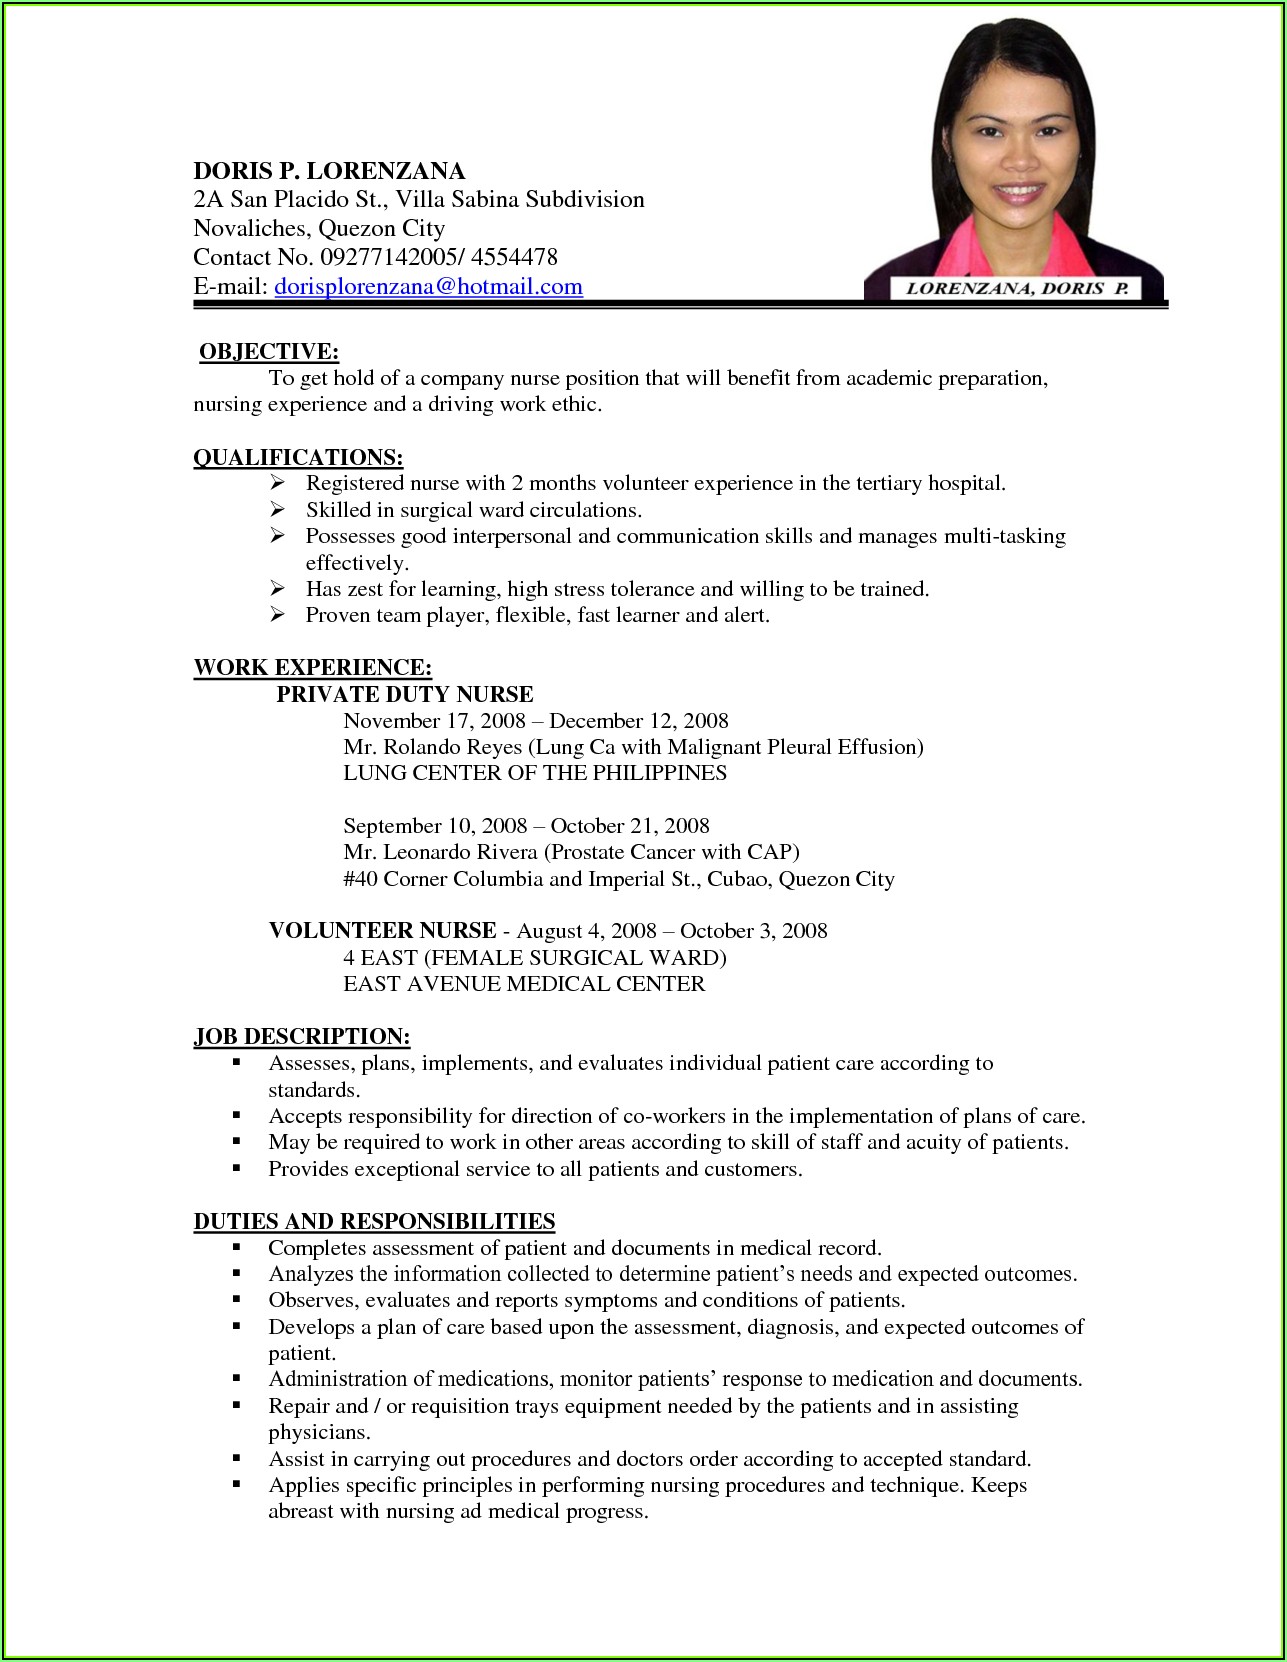 Sample Resume For Nurses With Experience In India